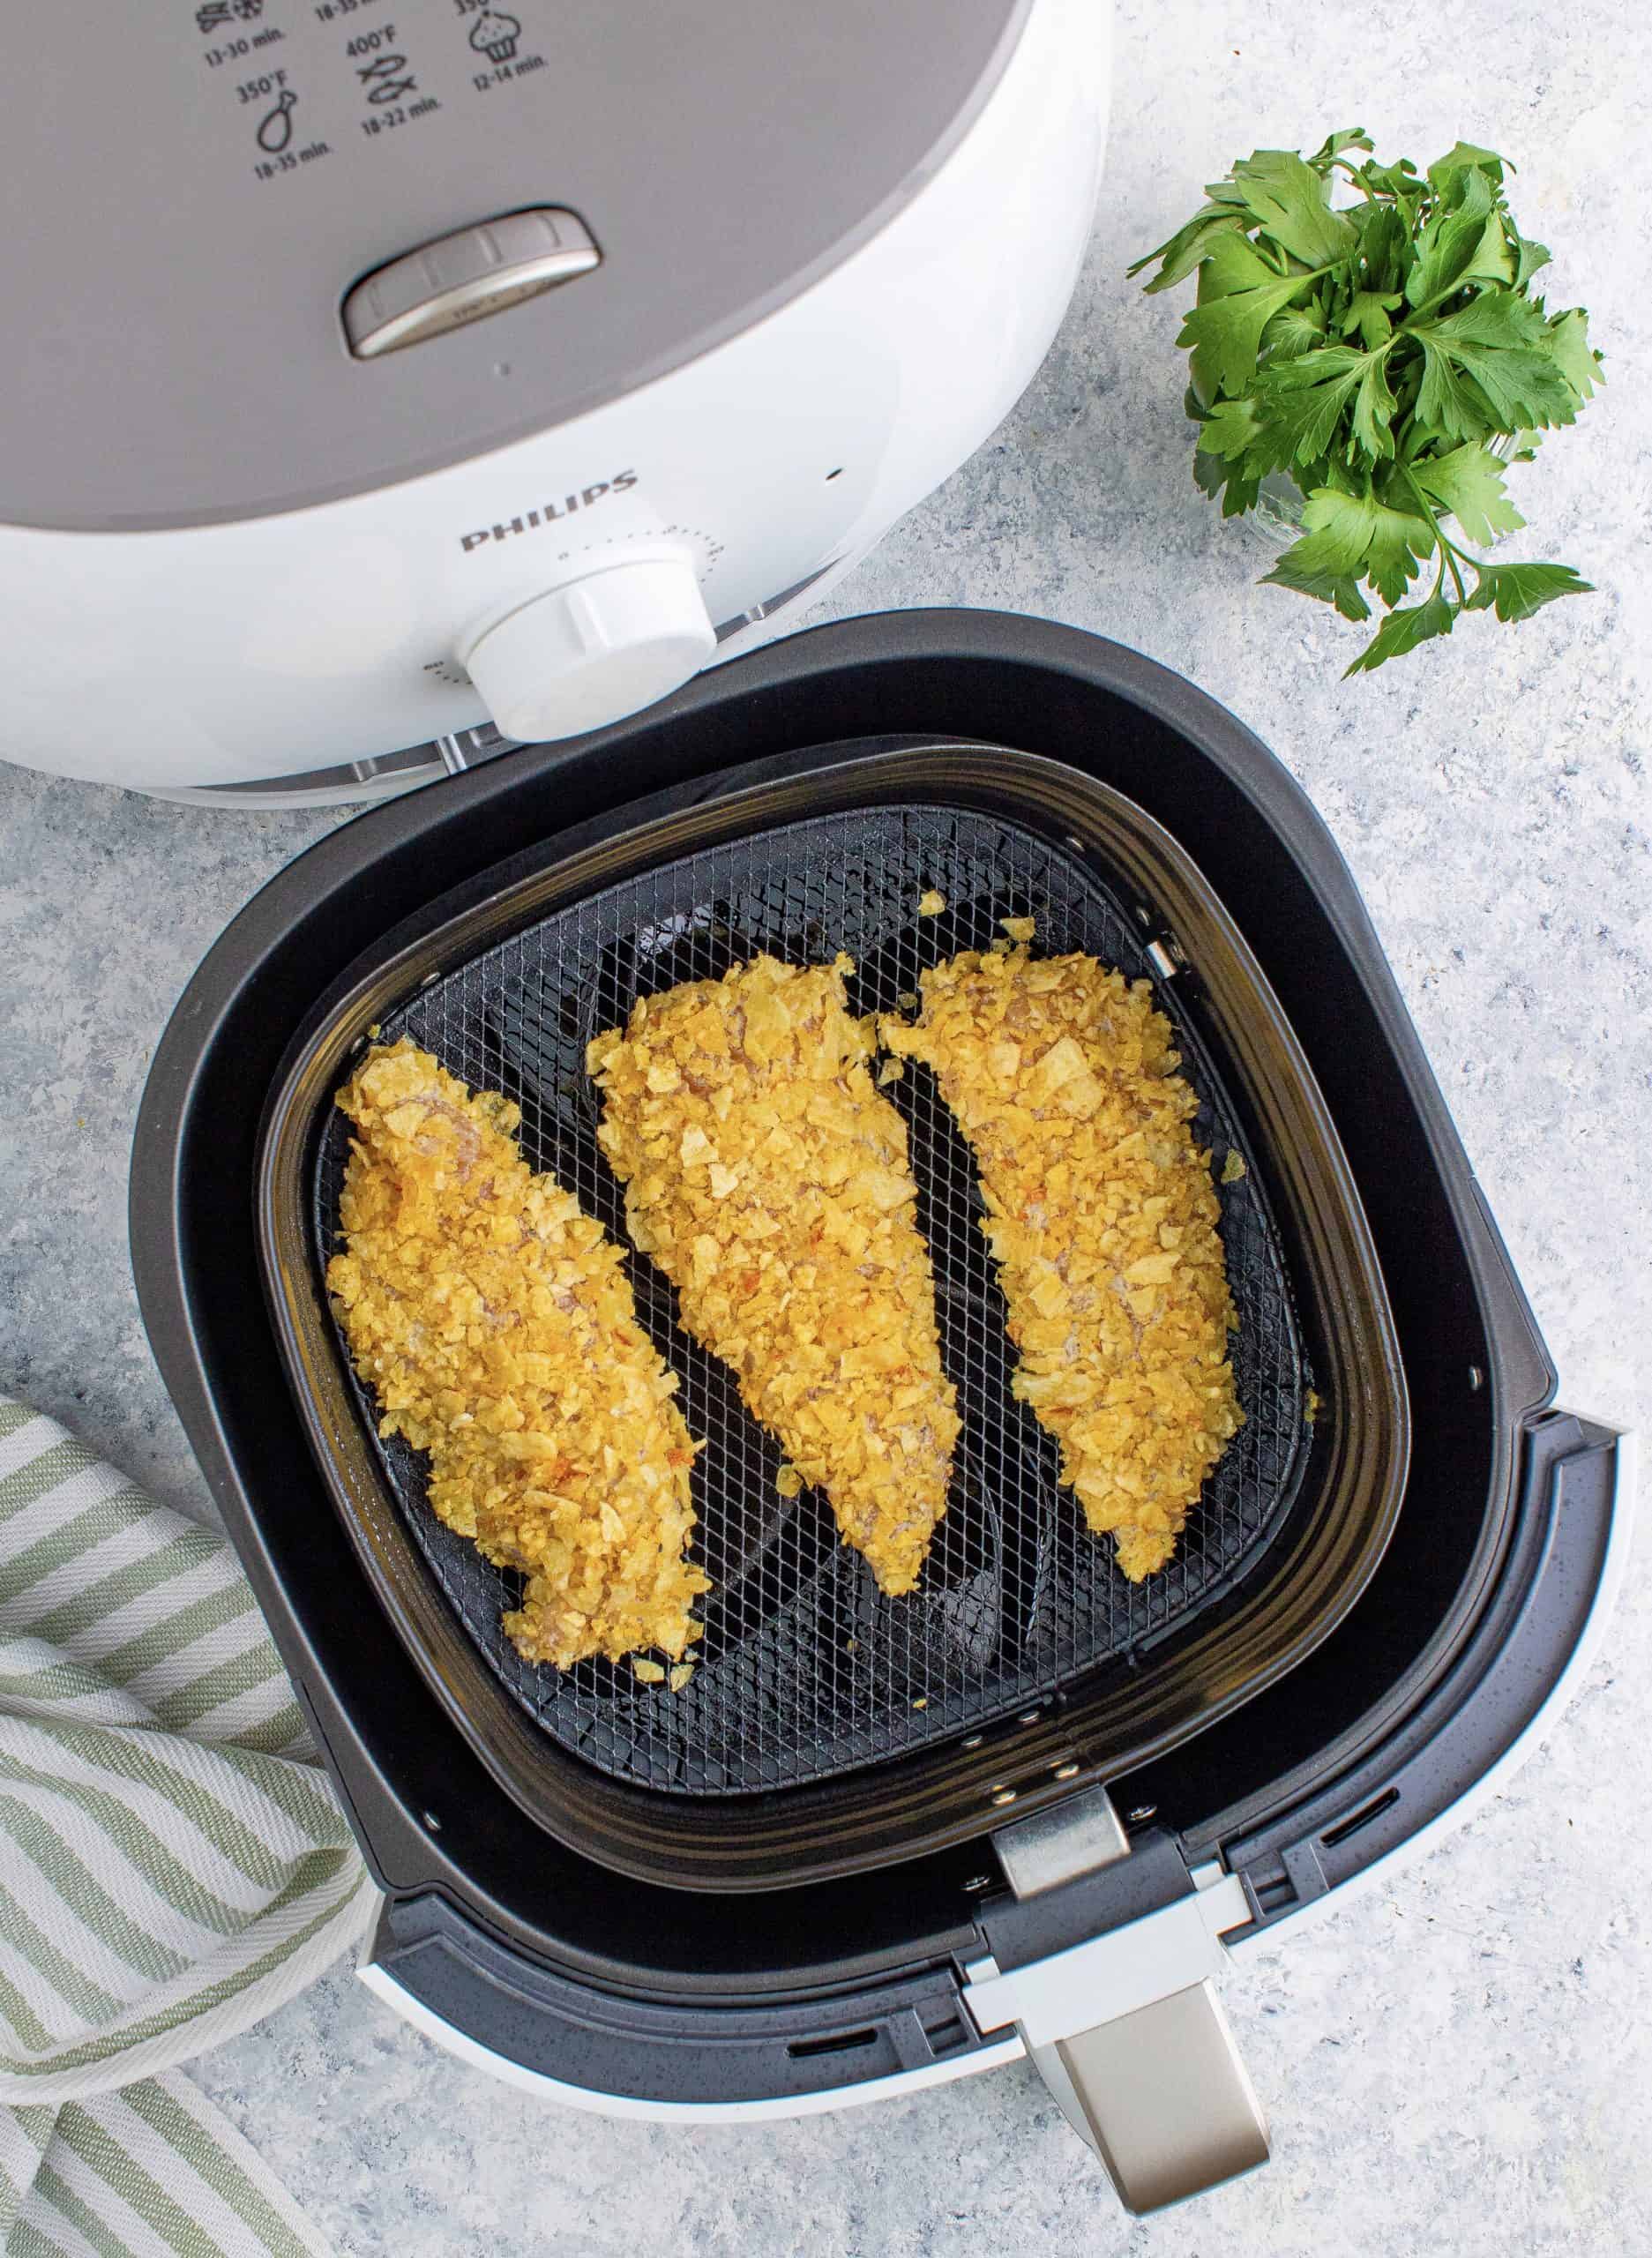 raw, coated chicken tenders in the bottom of a black air fryer basket.